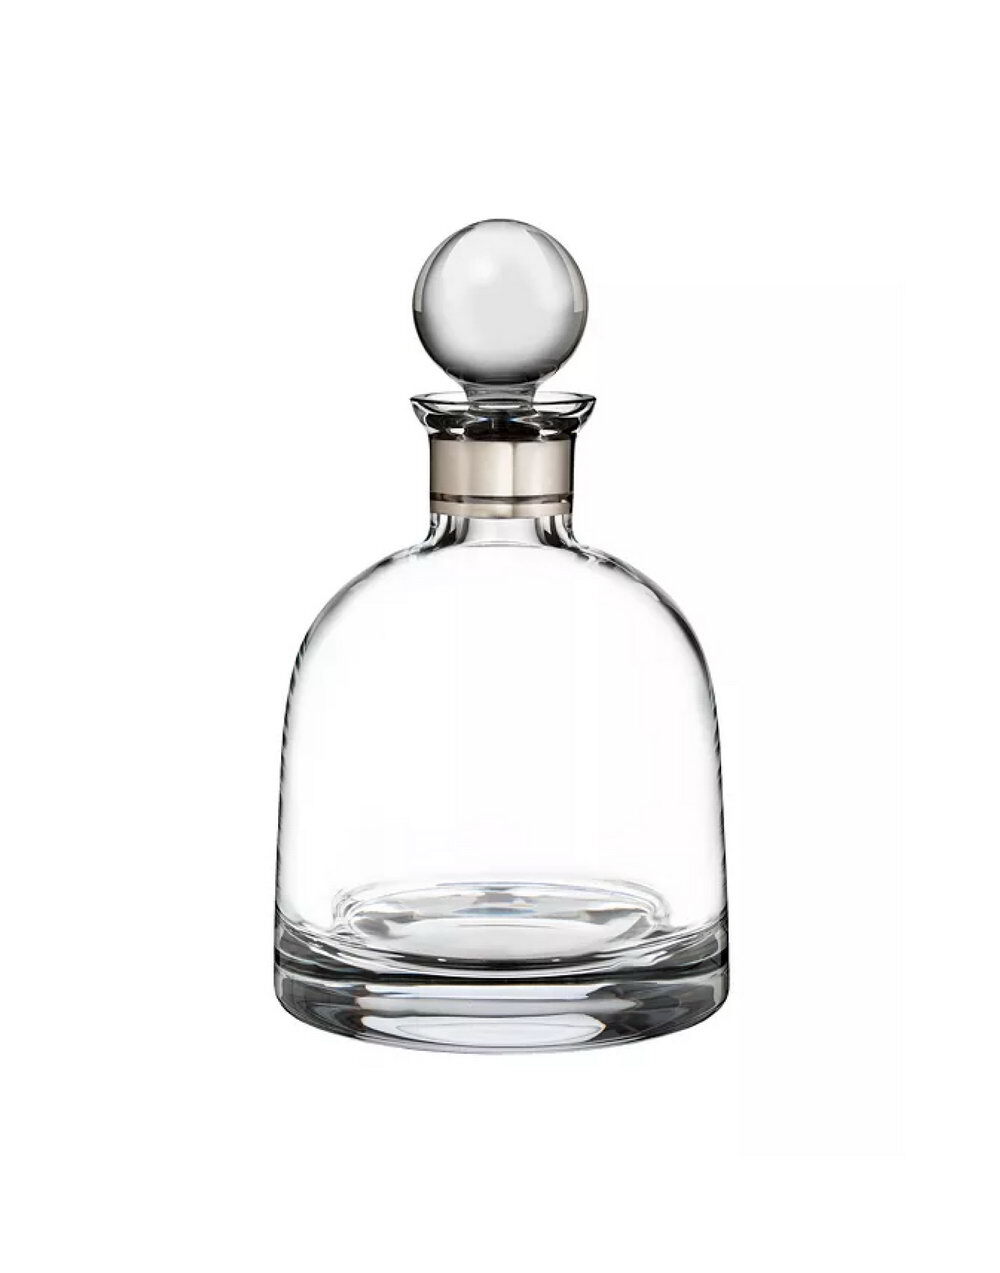 Elegance short decanter with round stopper